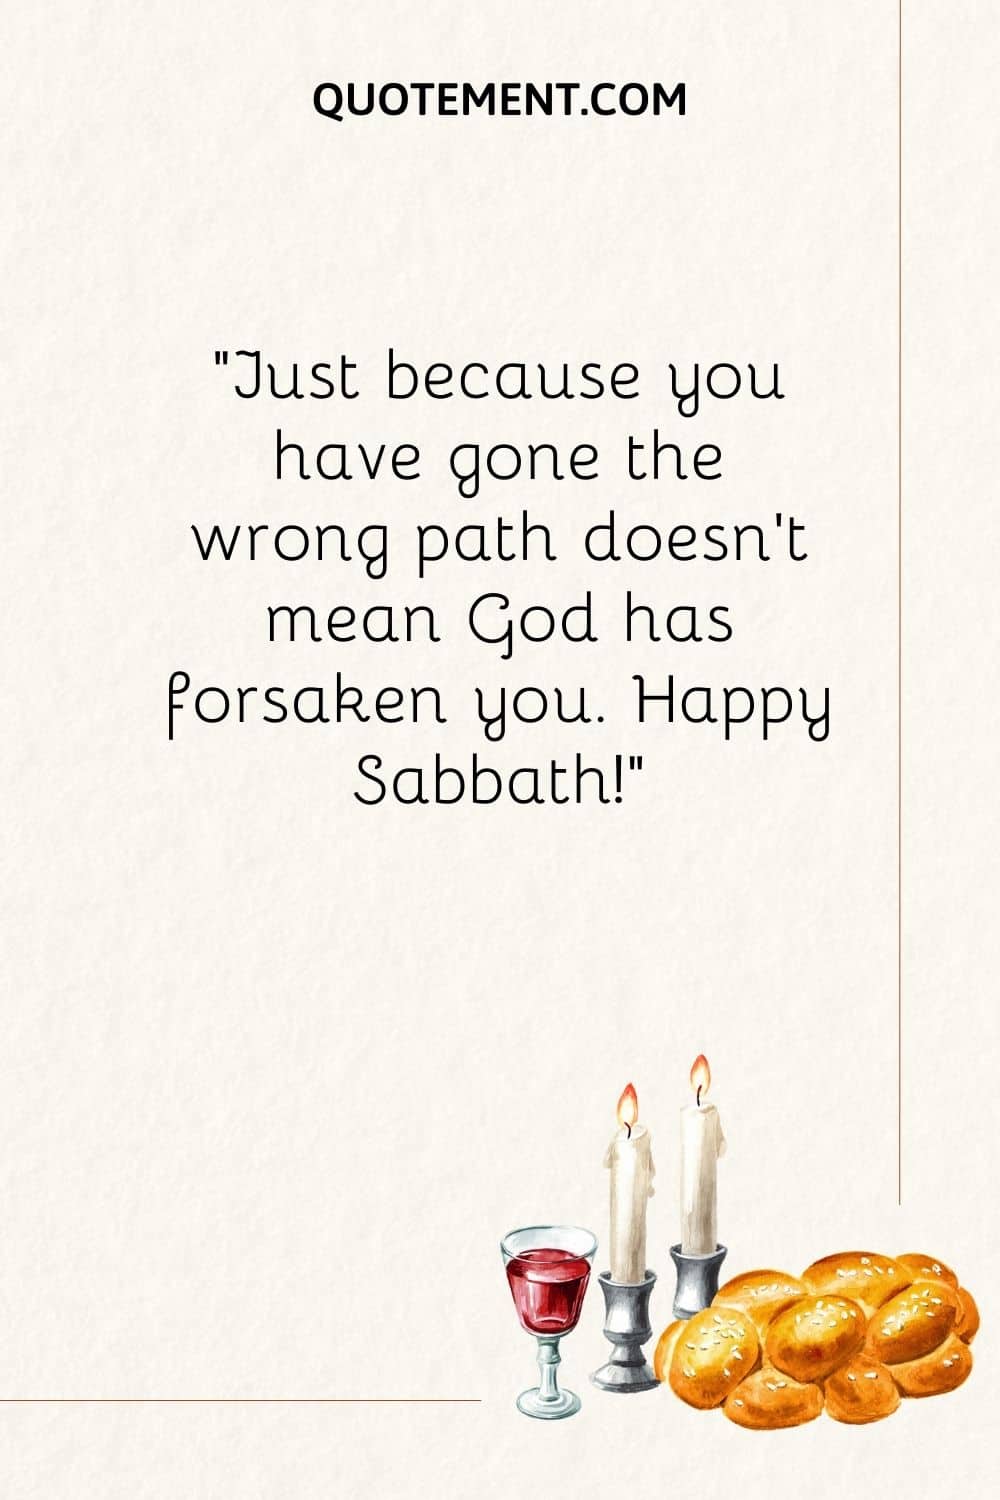 candles and bread image representing happy sabbath quote